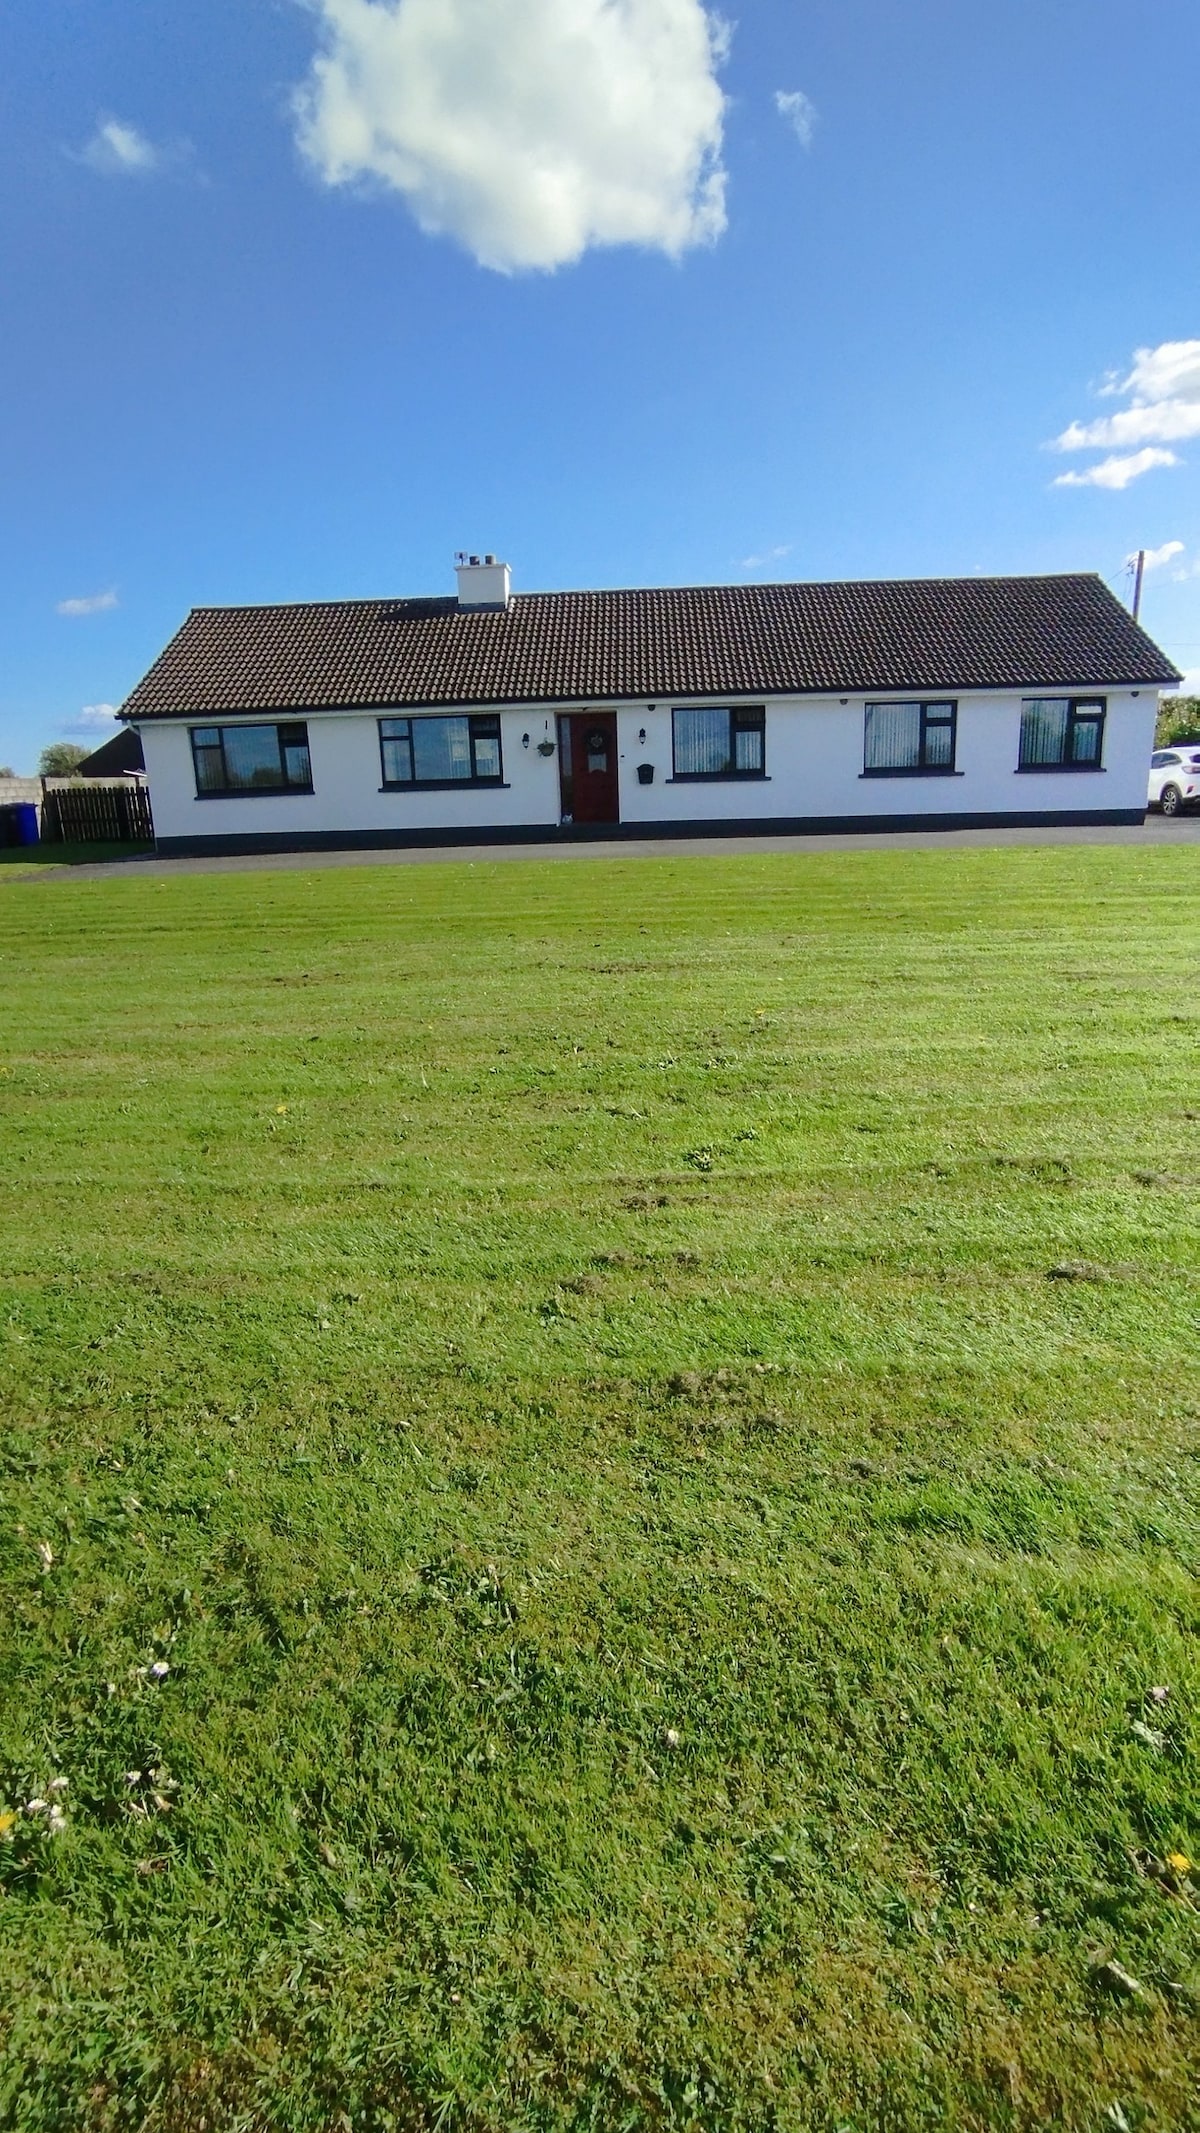 Spacious apartment set in rural county Galway